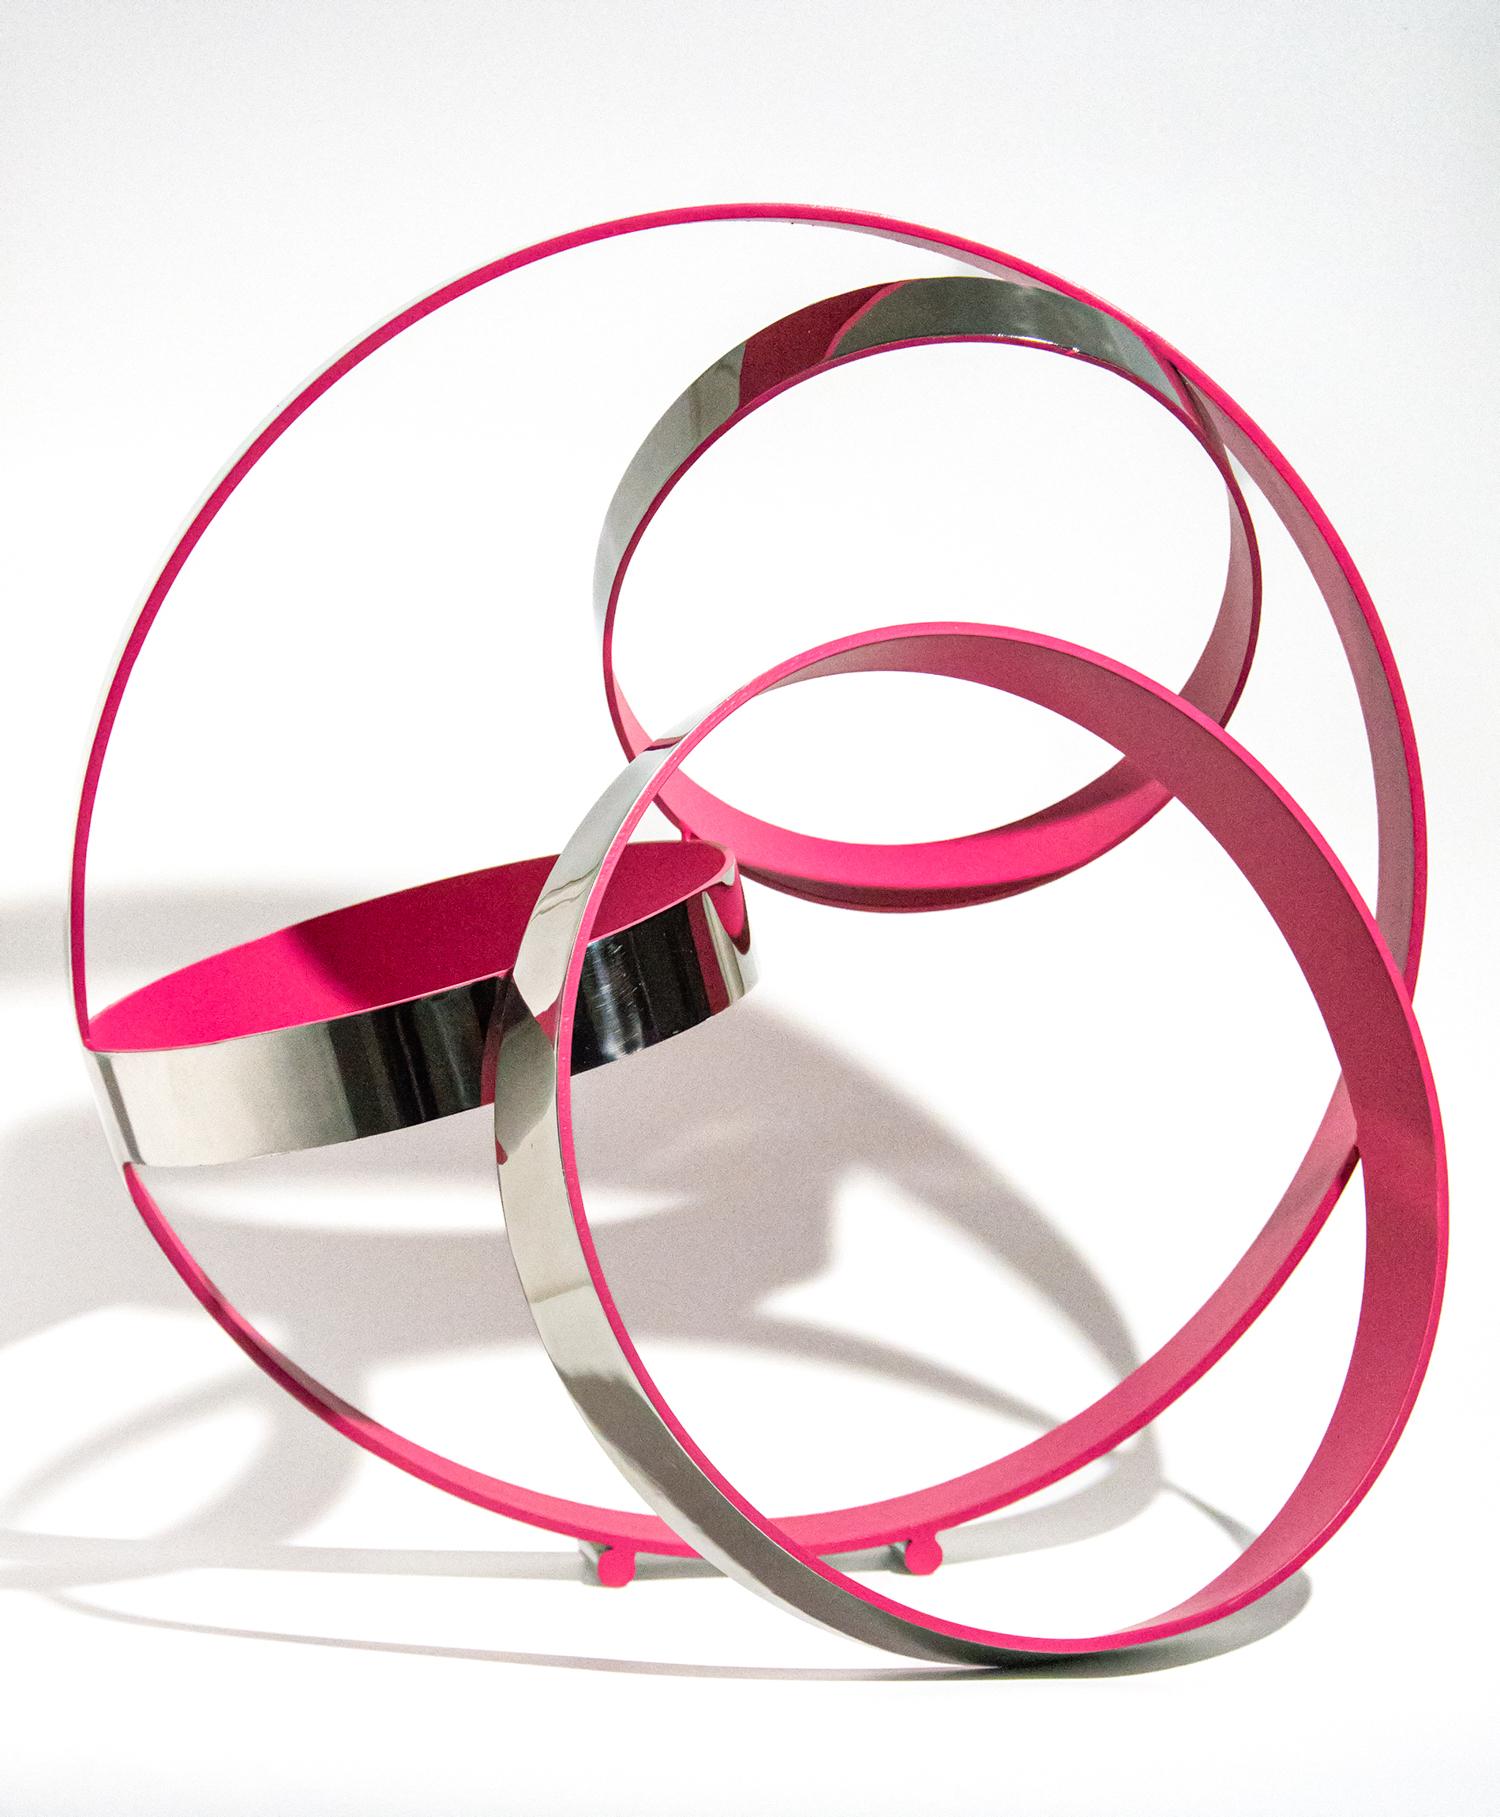 Four Ring Temps Zero Pink - geometric abstract, stainless steel sculpture